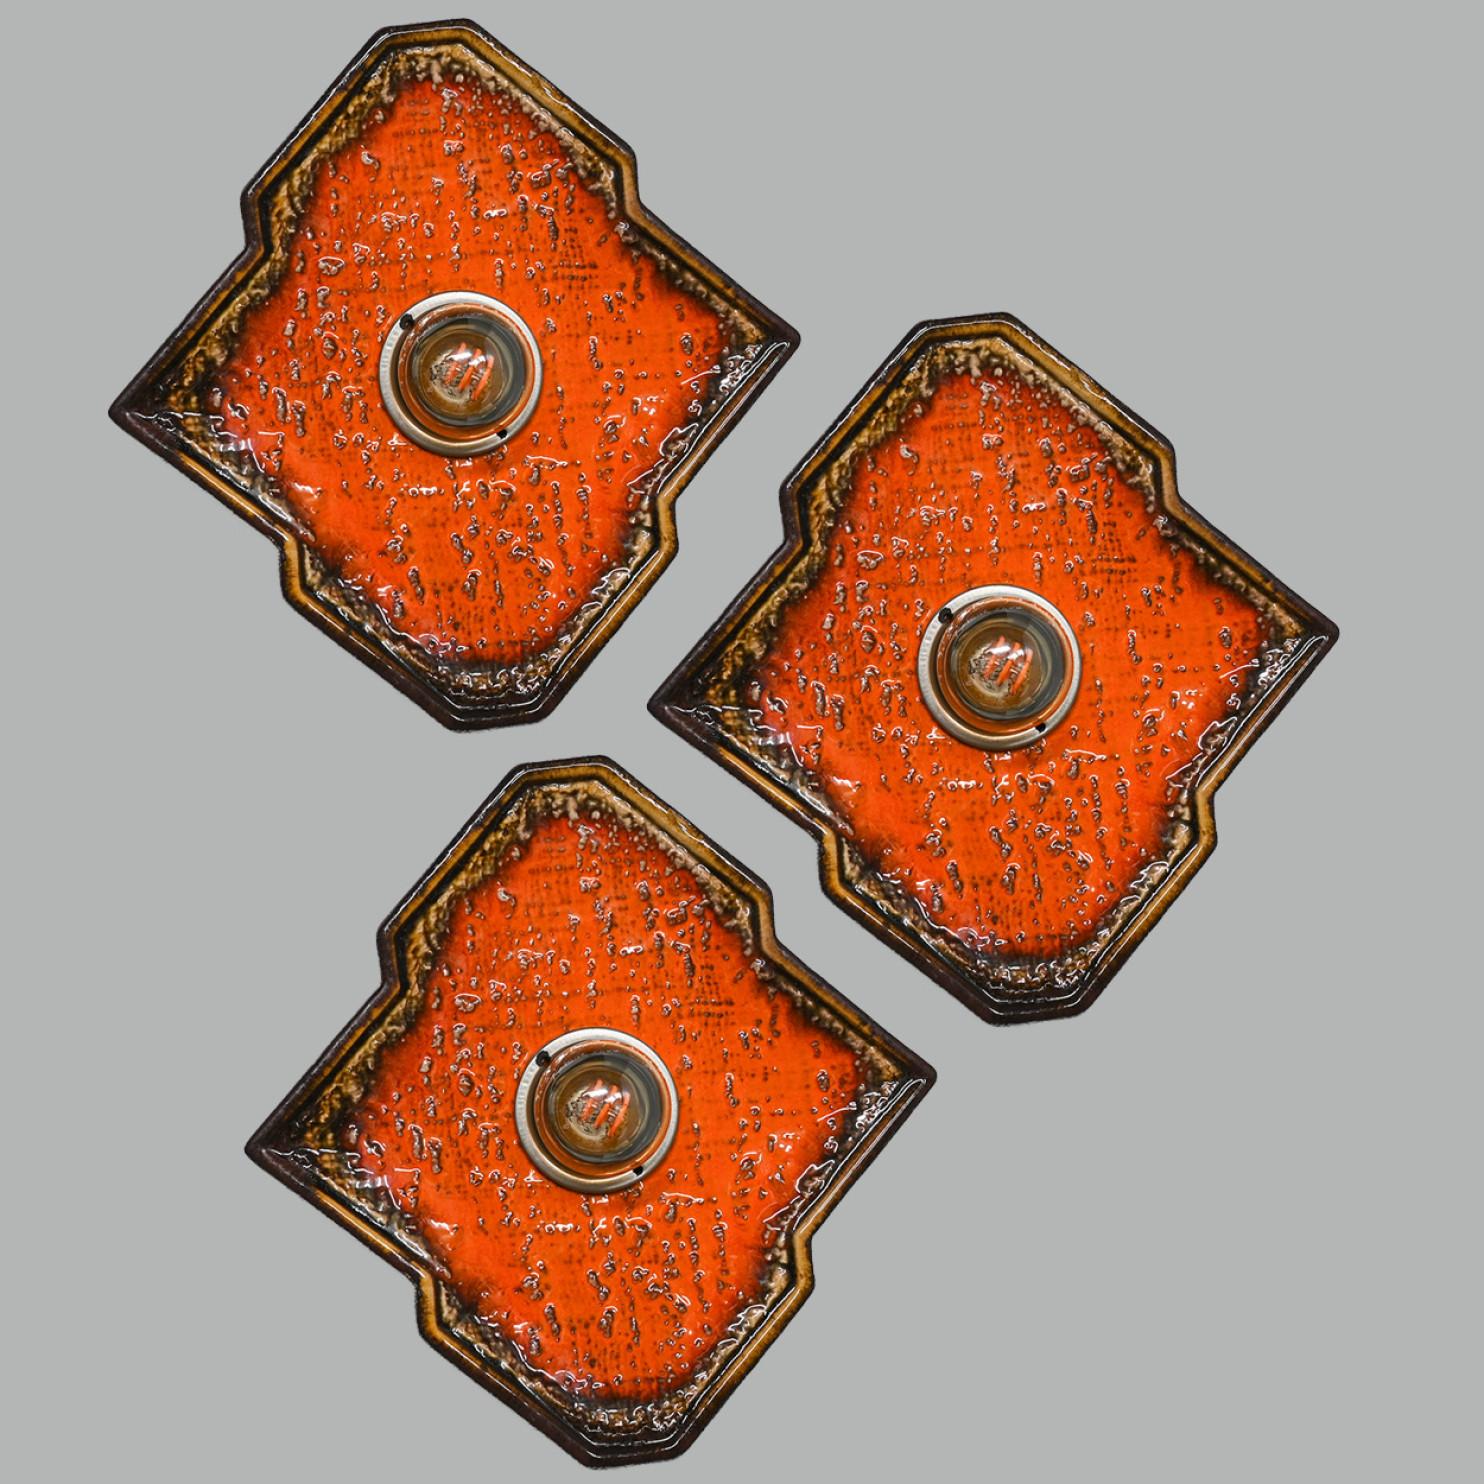 Brown and orange diamond-shaped ceramic wall lights/flush mounts Germany in the 1970s.

This lights have a unusual shape. This makes it possible to create a playful arrangement. Can also be used as flush mounts.

We used amber light bulbs (see